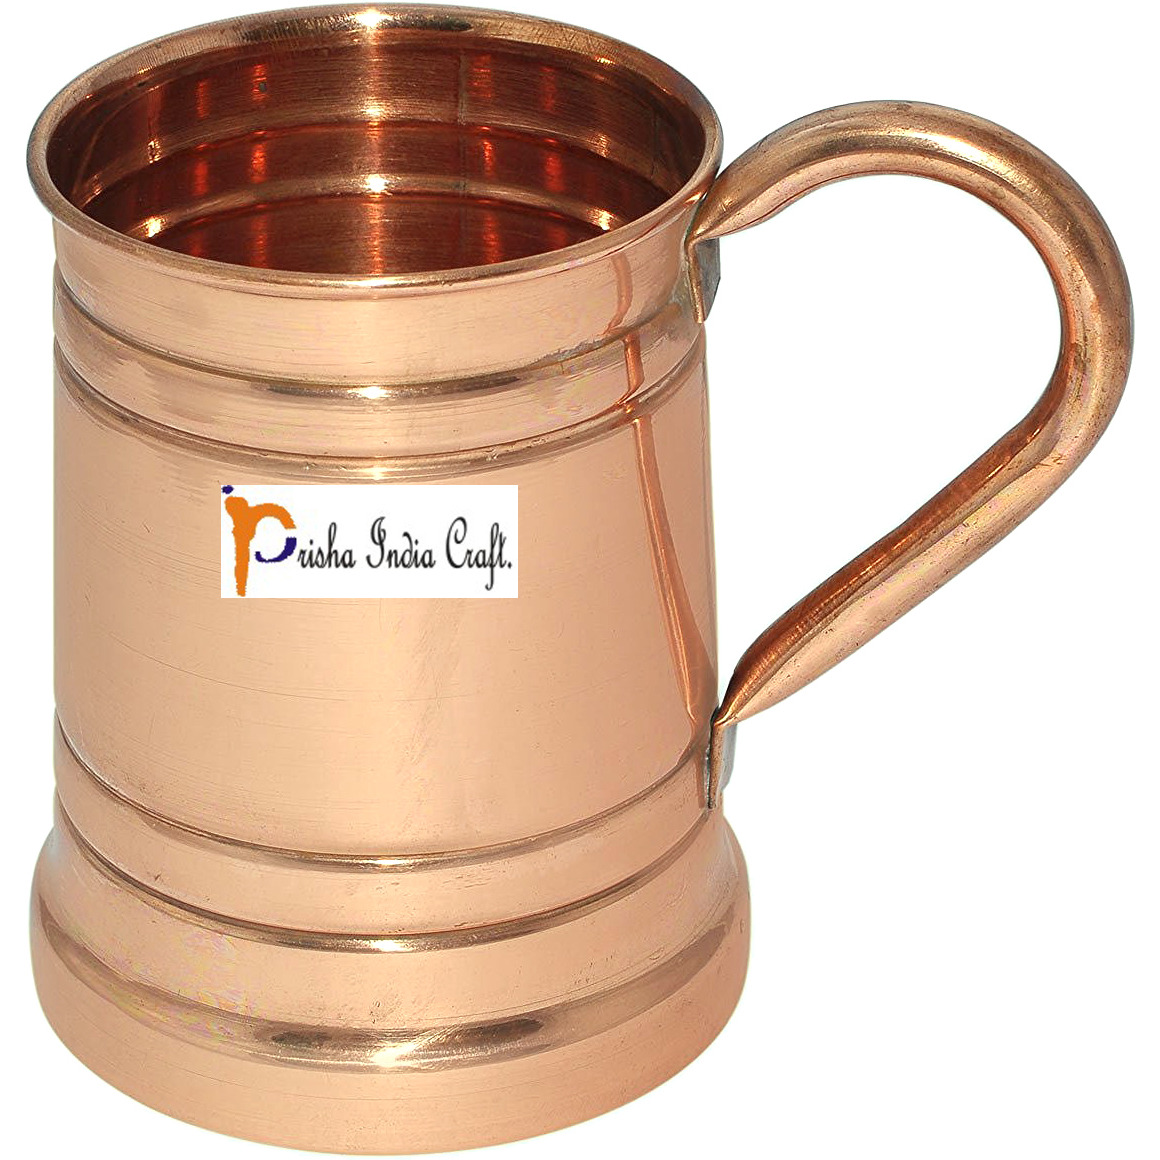 Set of 4 Prisha India Craft B. Moscow Mules Copper Mug 600 ML / 20 oz - Mule Cup, Moscow Mule Cocktail Cup, Copper Mugs, Cocktail Mugs - Christmas Gift with WOODEN KEYRING